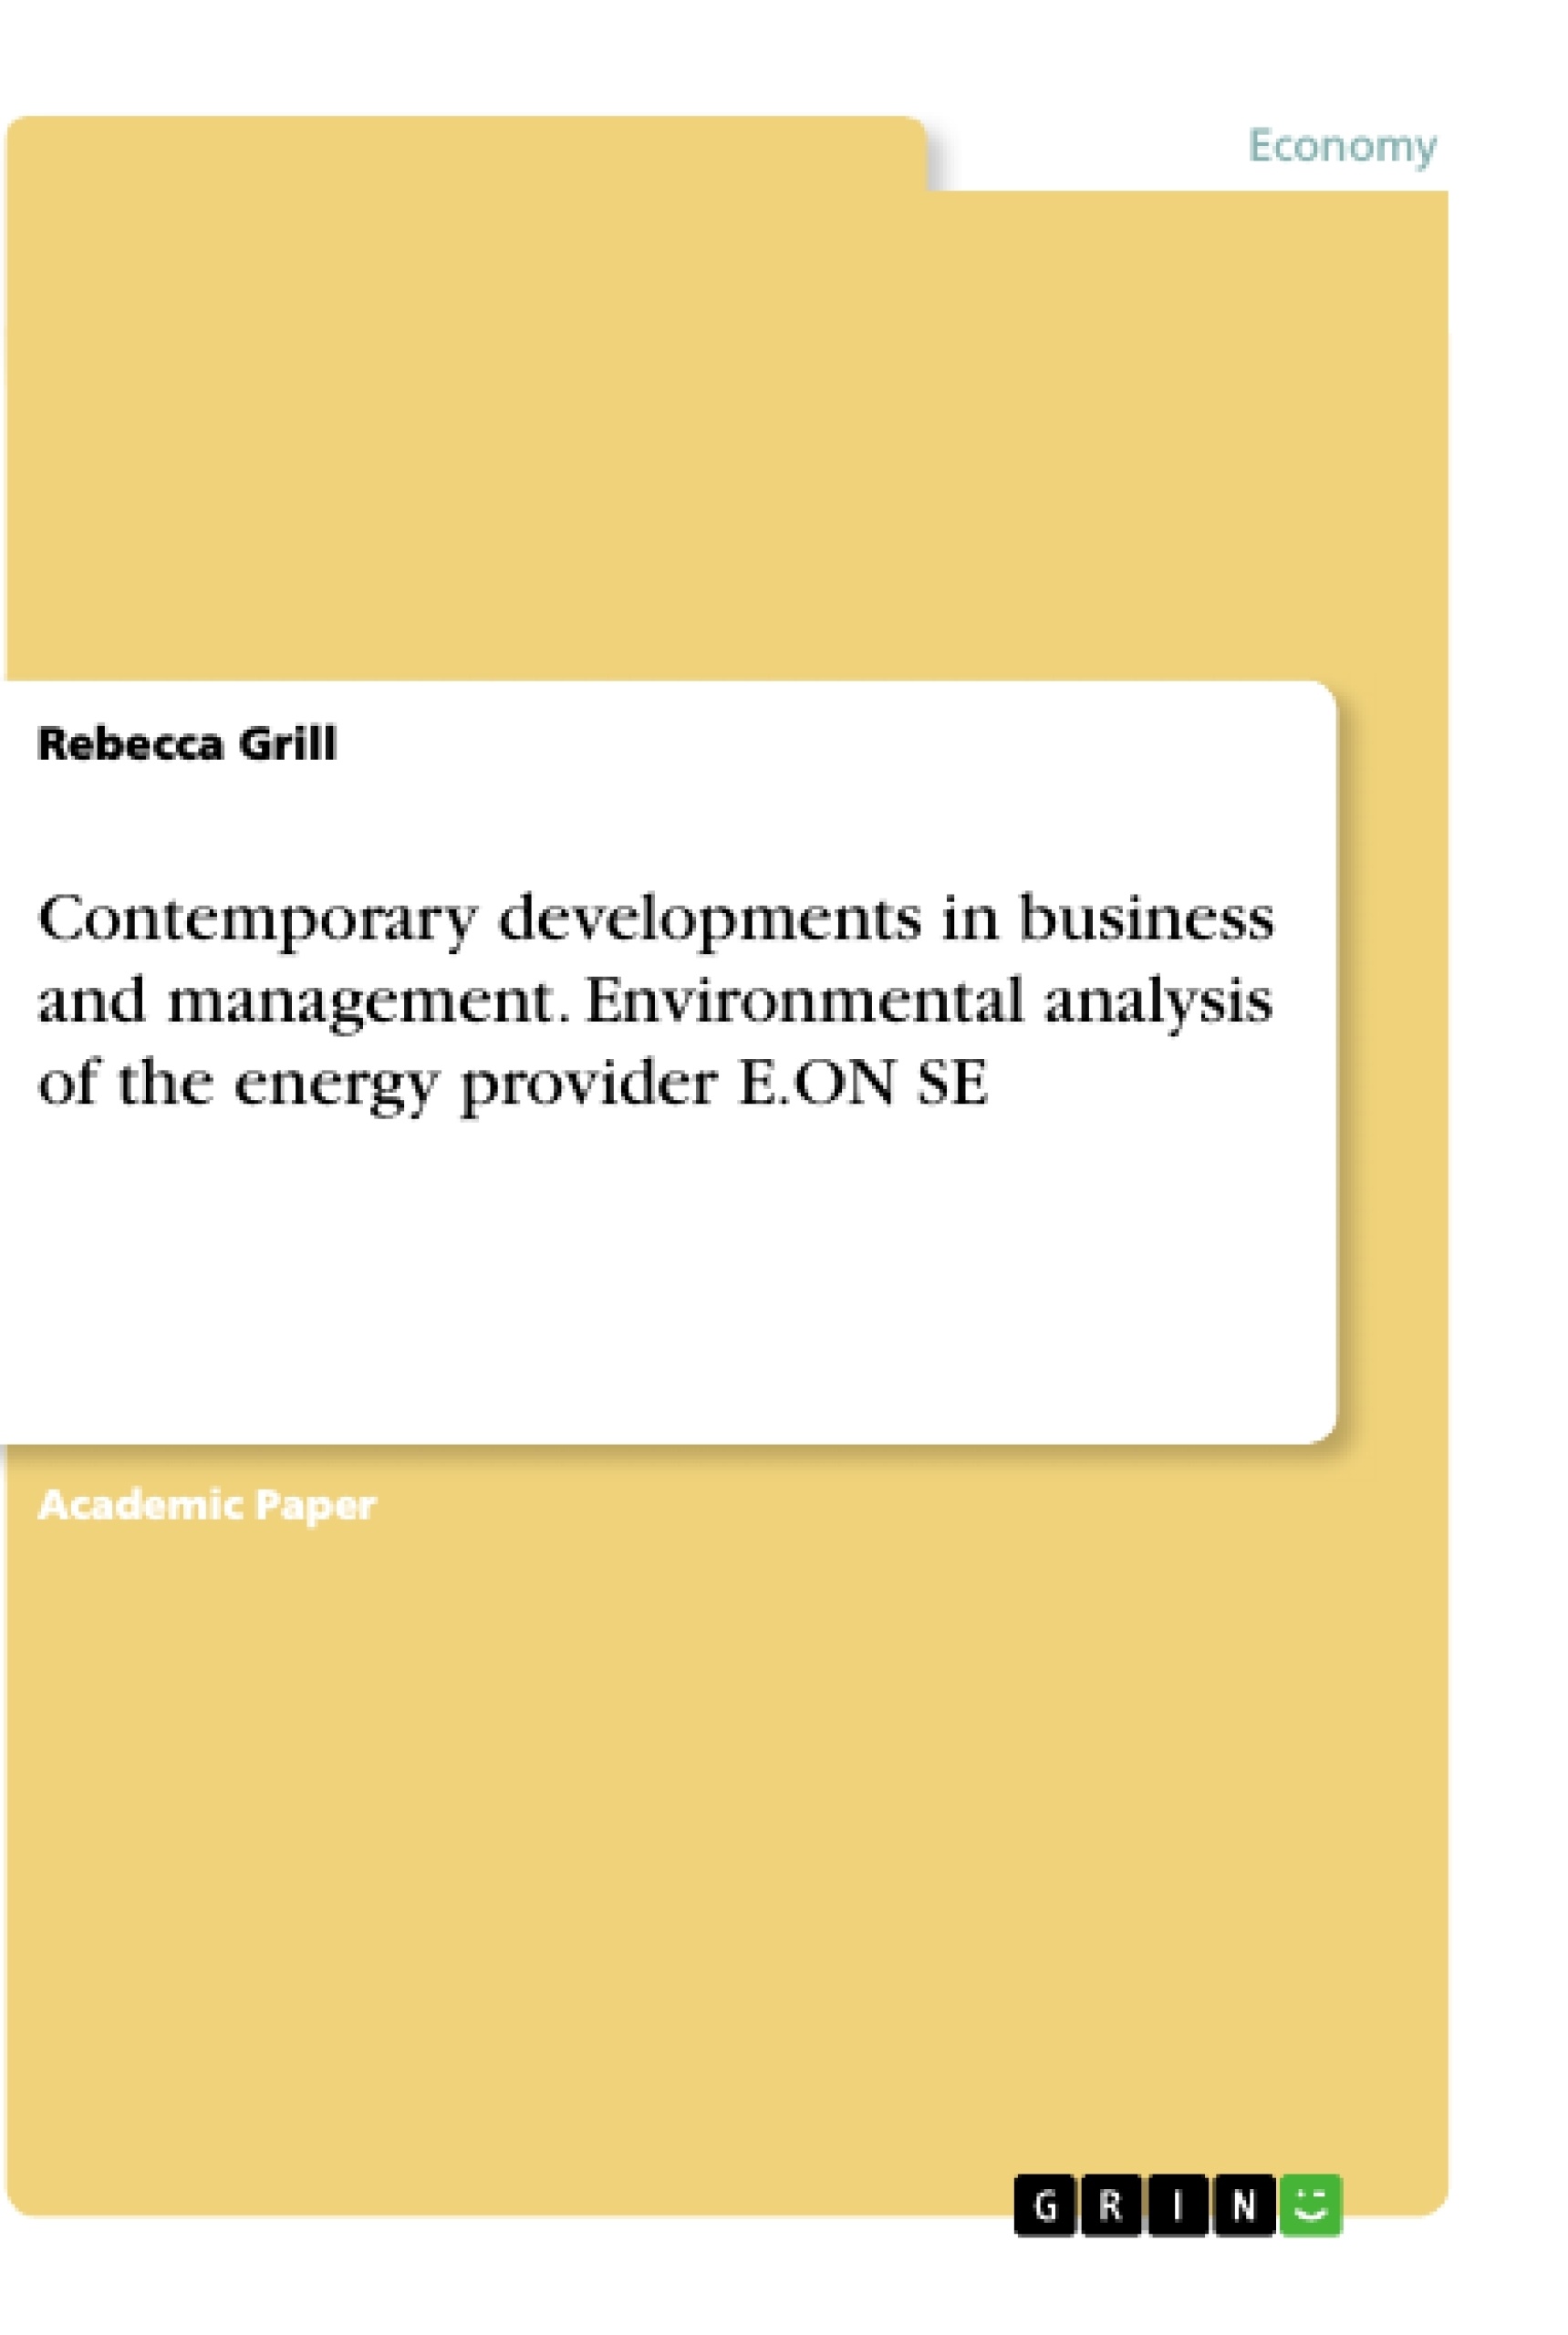 Titre: Contemporary developments in business and management. Environmental analysis of the energy provider E.ON SE